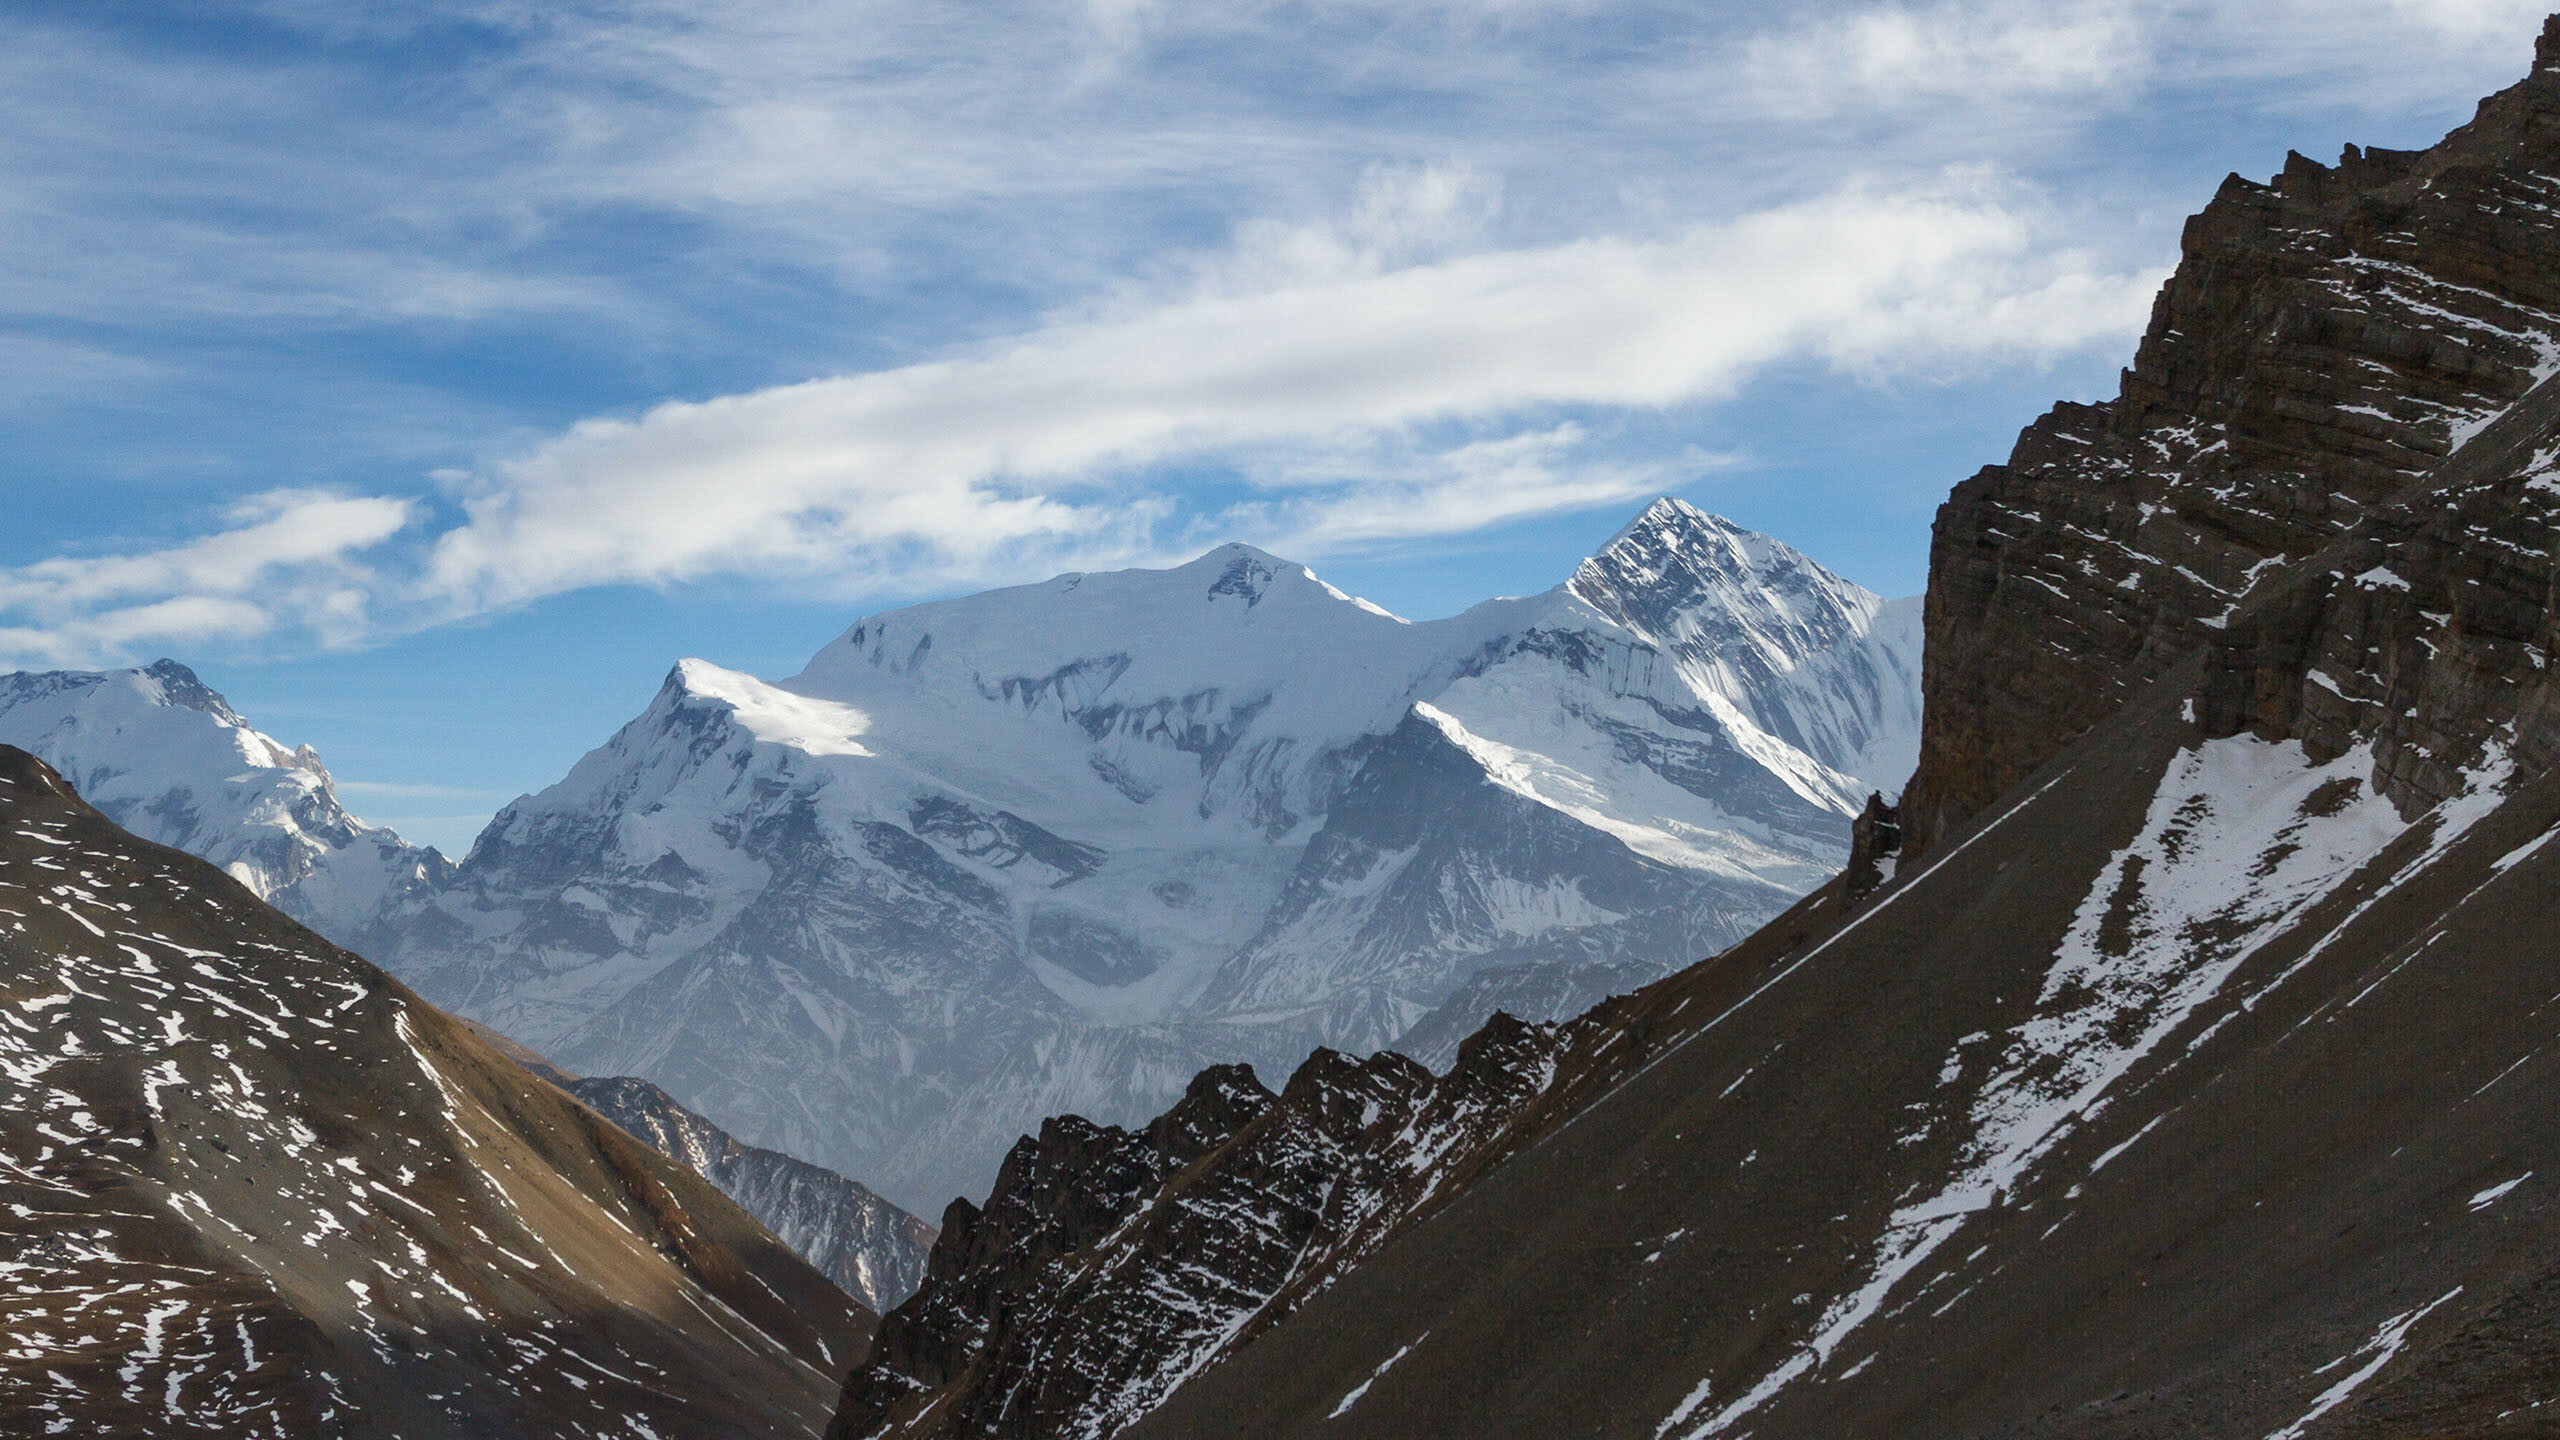 Himalayas: K2, Kanchenjunga, Lahotse and Dhaulagiri are popular peaks for climbing in the range. 2560x1440 HD Wallpaper.